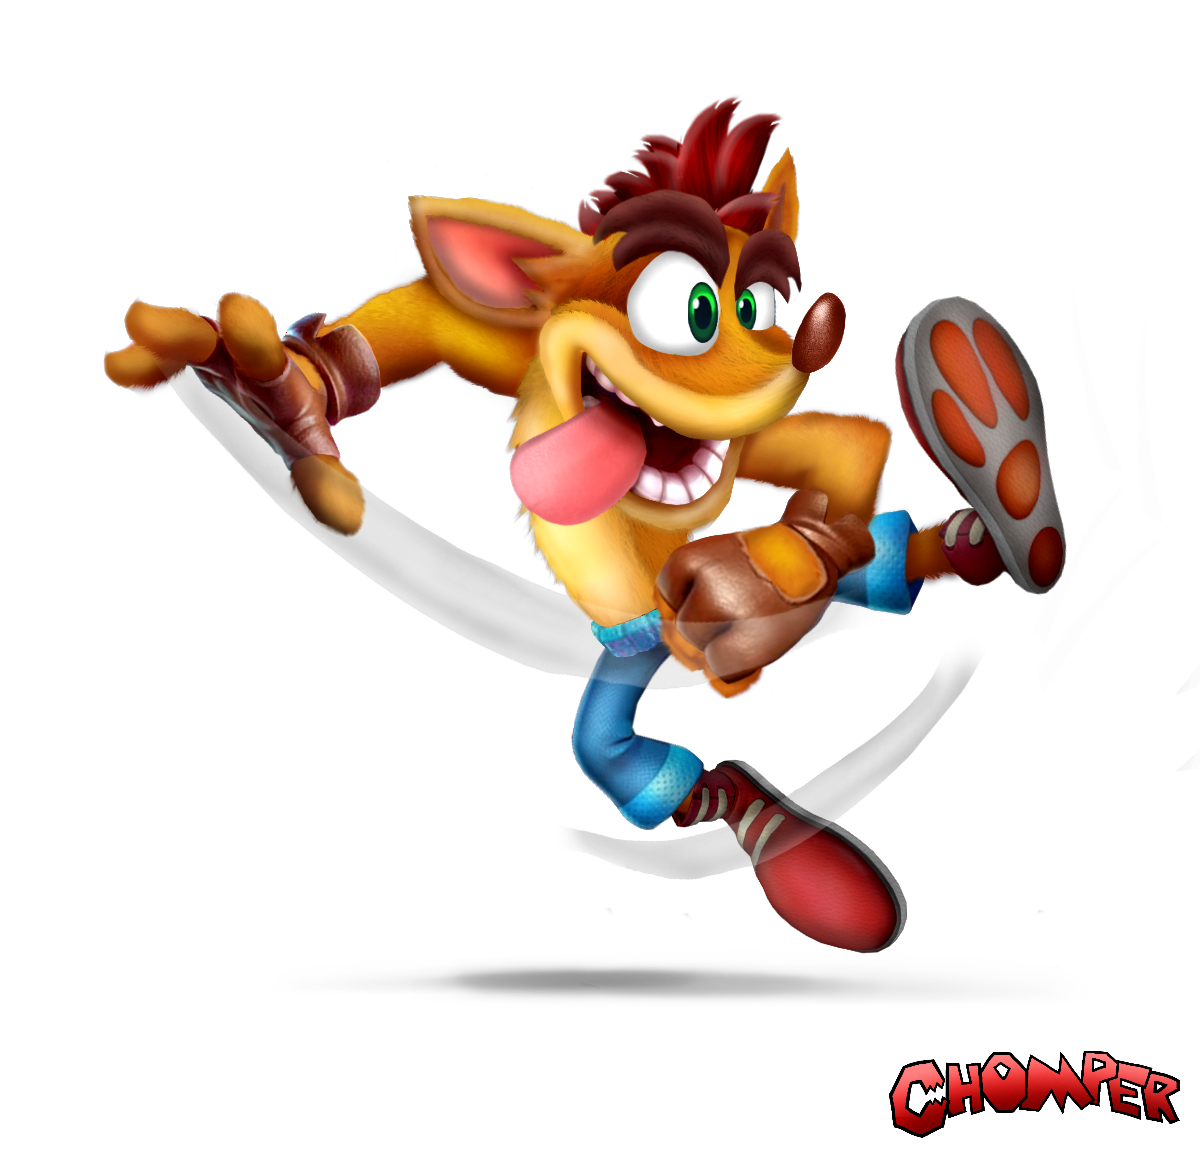 Crash Bandicoot in the style of Smash Ultimate! (By yours truly) : r/ crashbandicoot